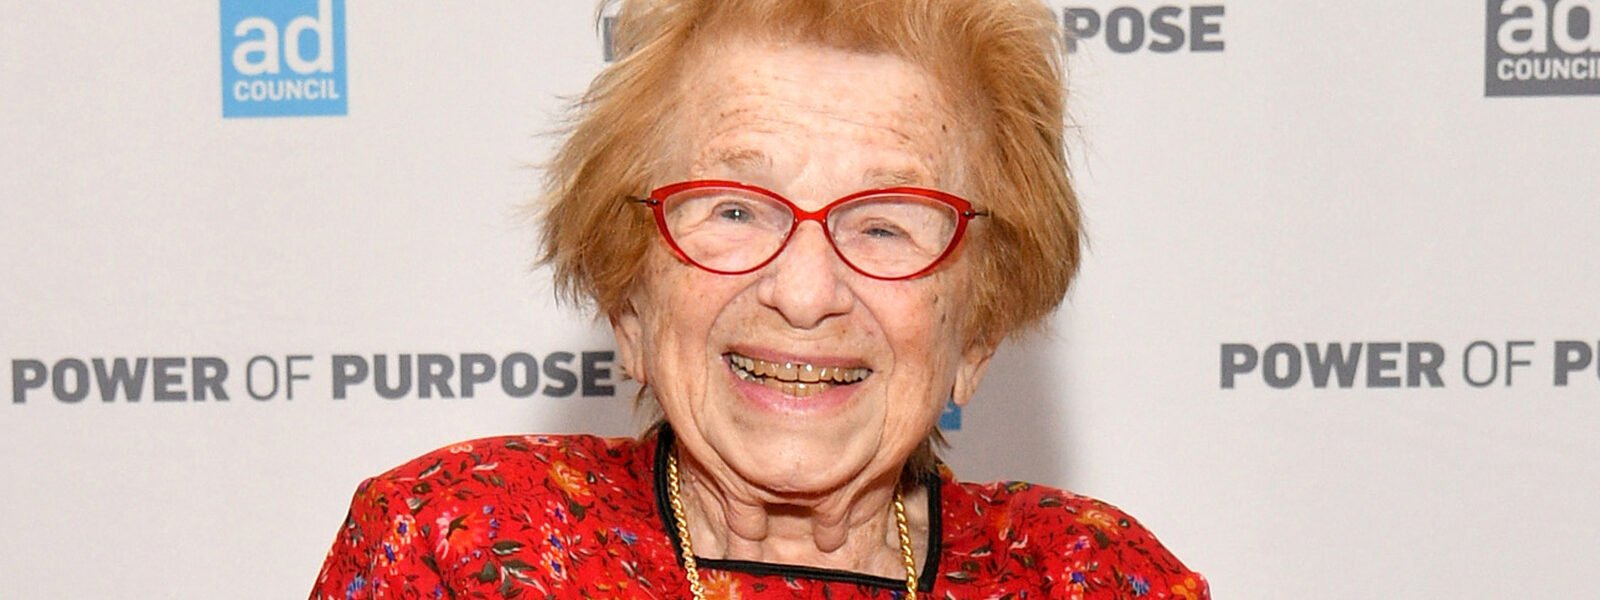 Tips For A Healthy Sex Life As You Age, According To Dr. Ruth - Health Digest